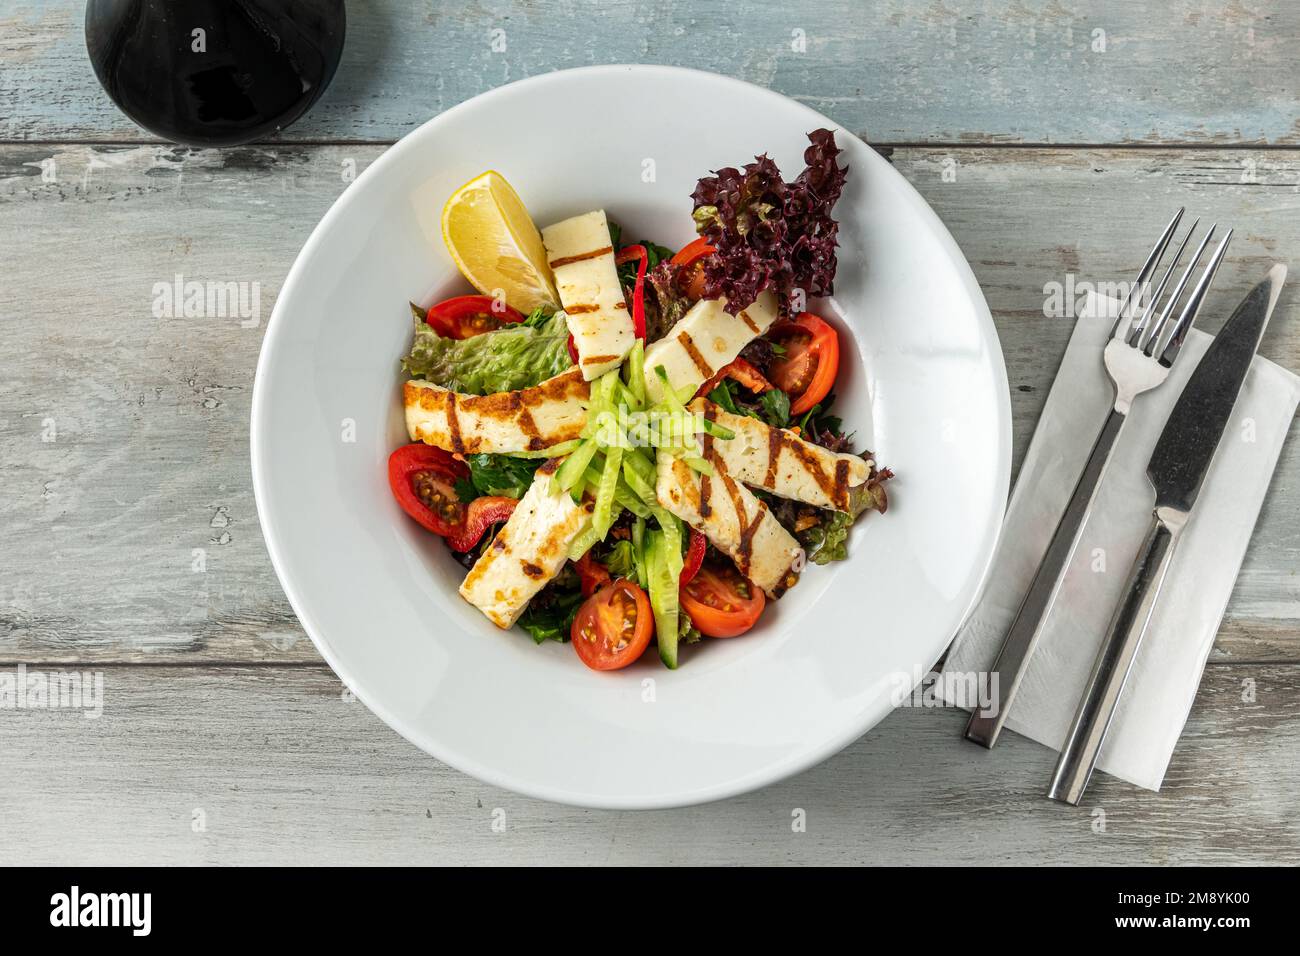 Salad with tomato and halloumi cheese on wooden table Stock Photo